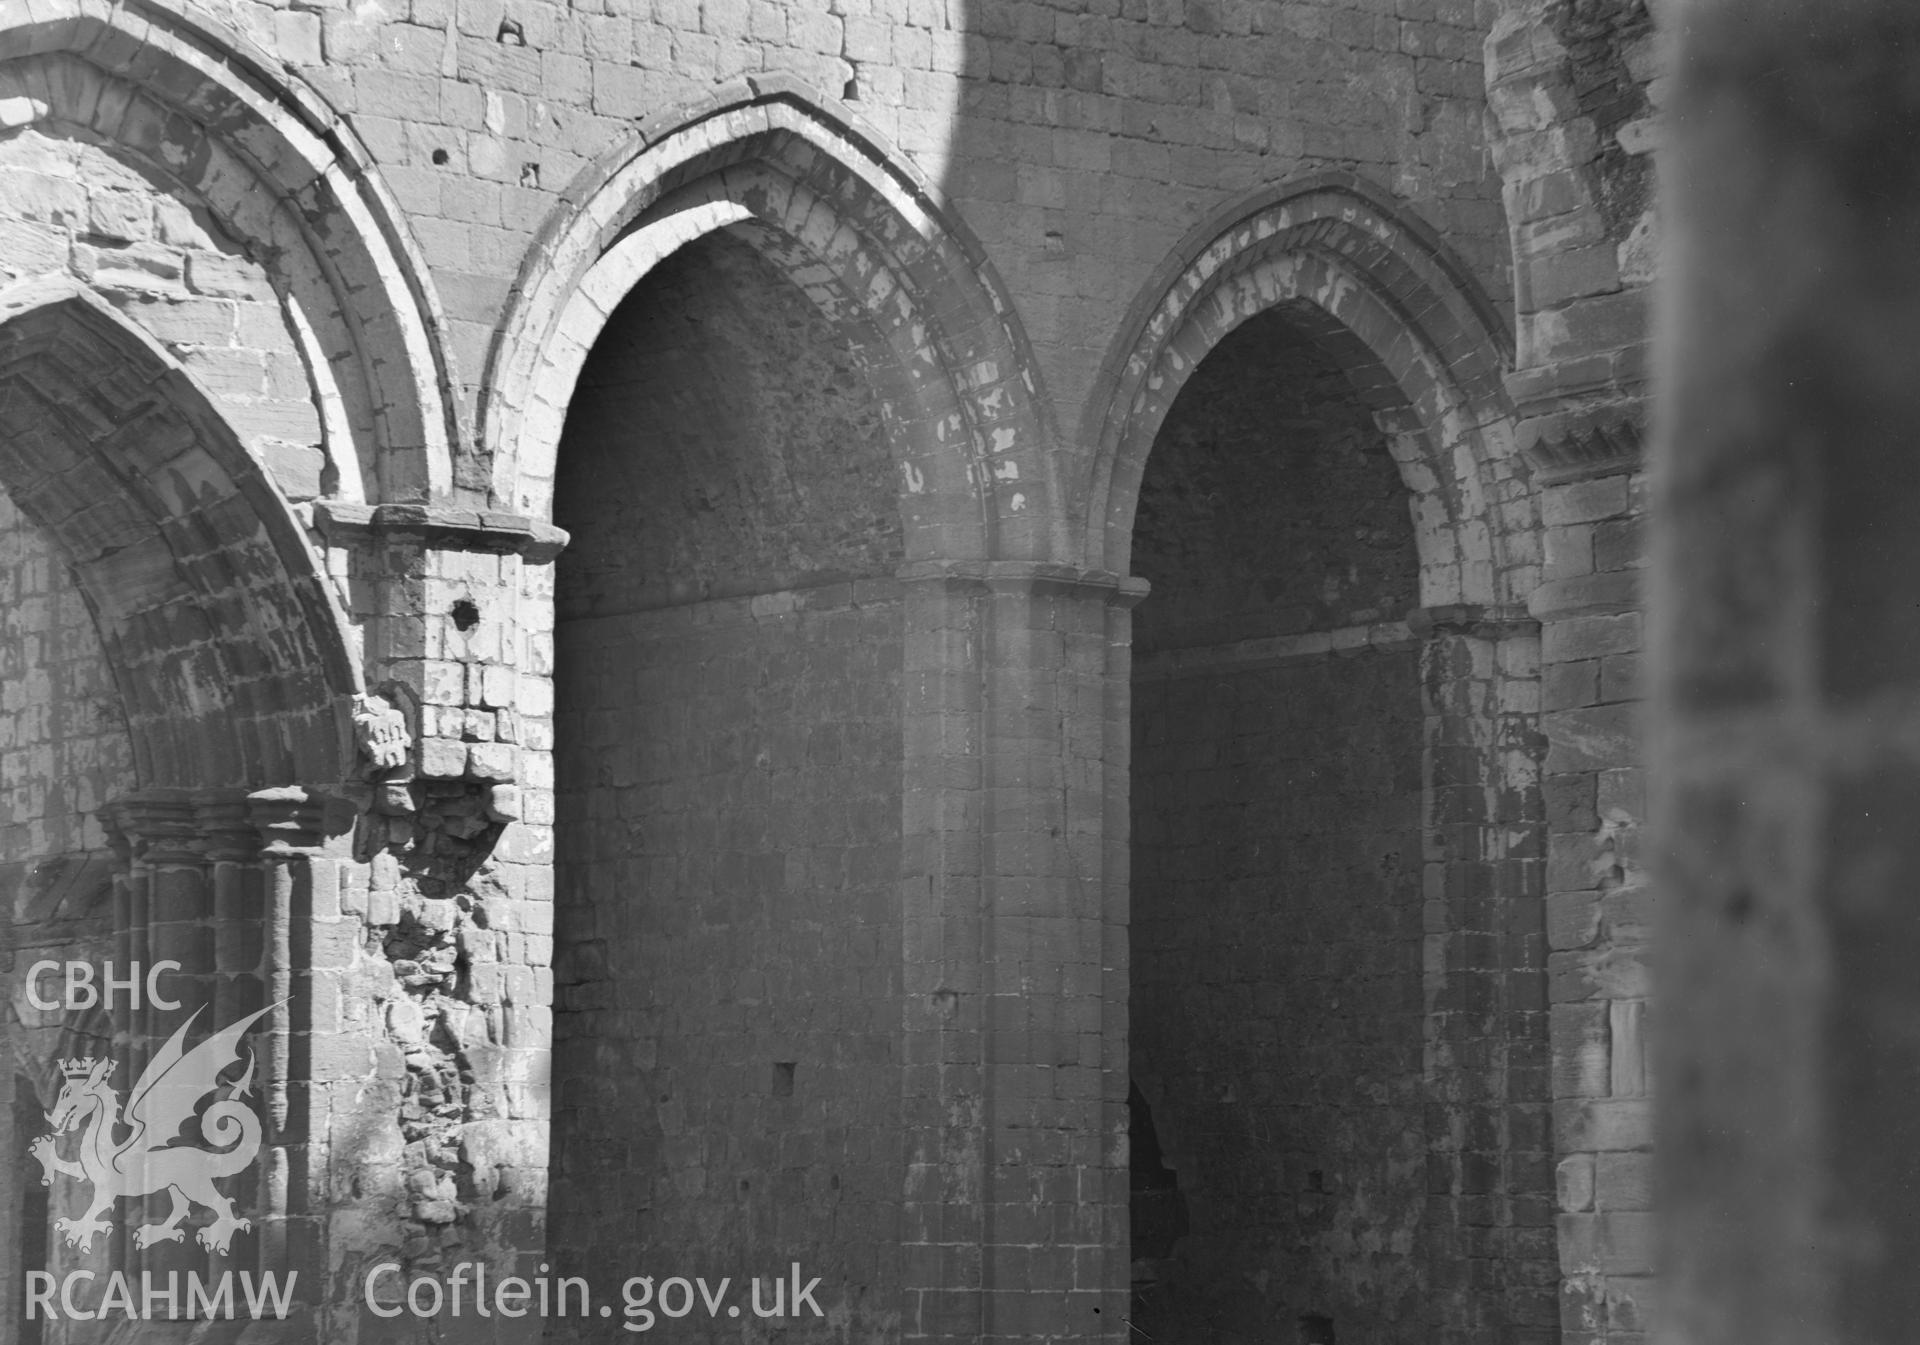 Digital copy of a black and white acetate negative showing detail exterior view of St. David's Cathedral, taken by E.W. Lovegrove, July 1936.